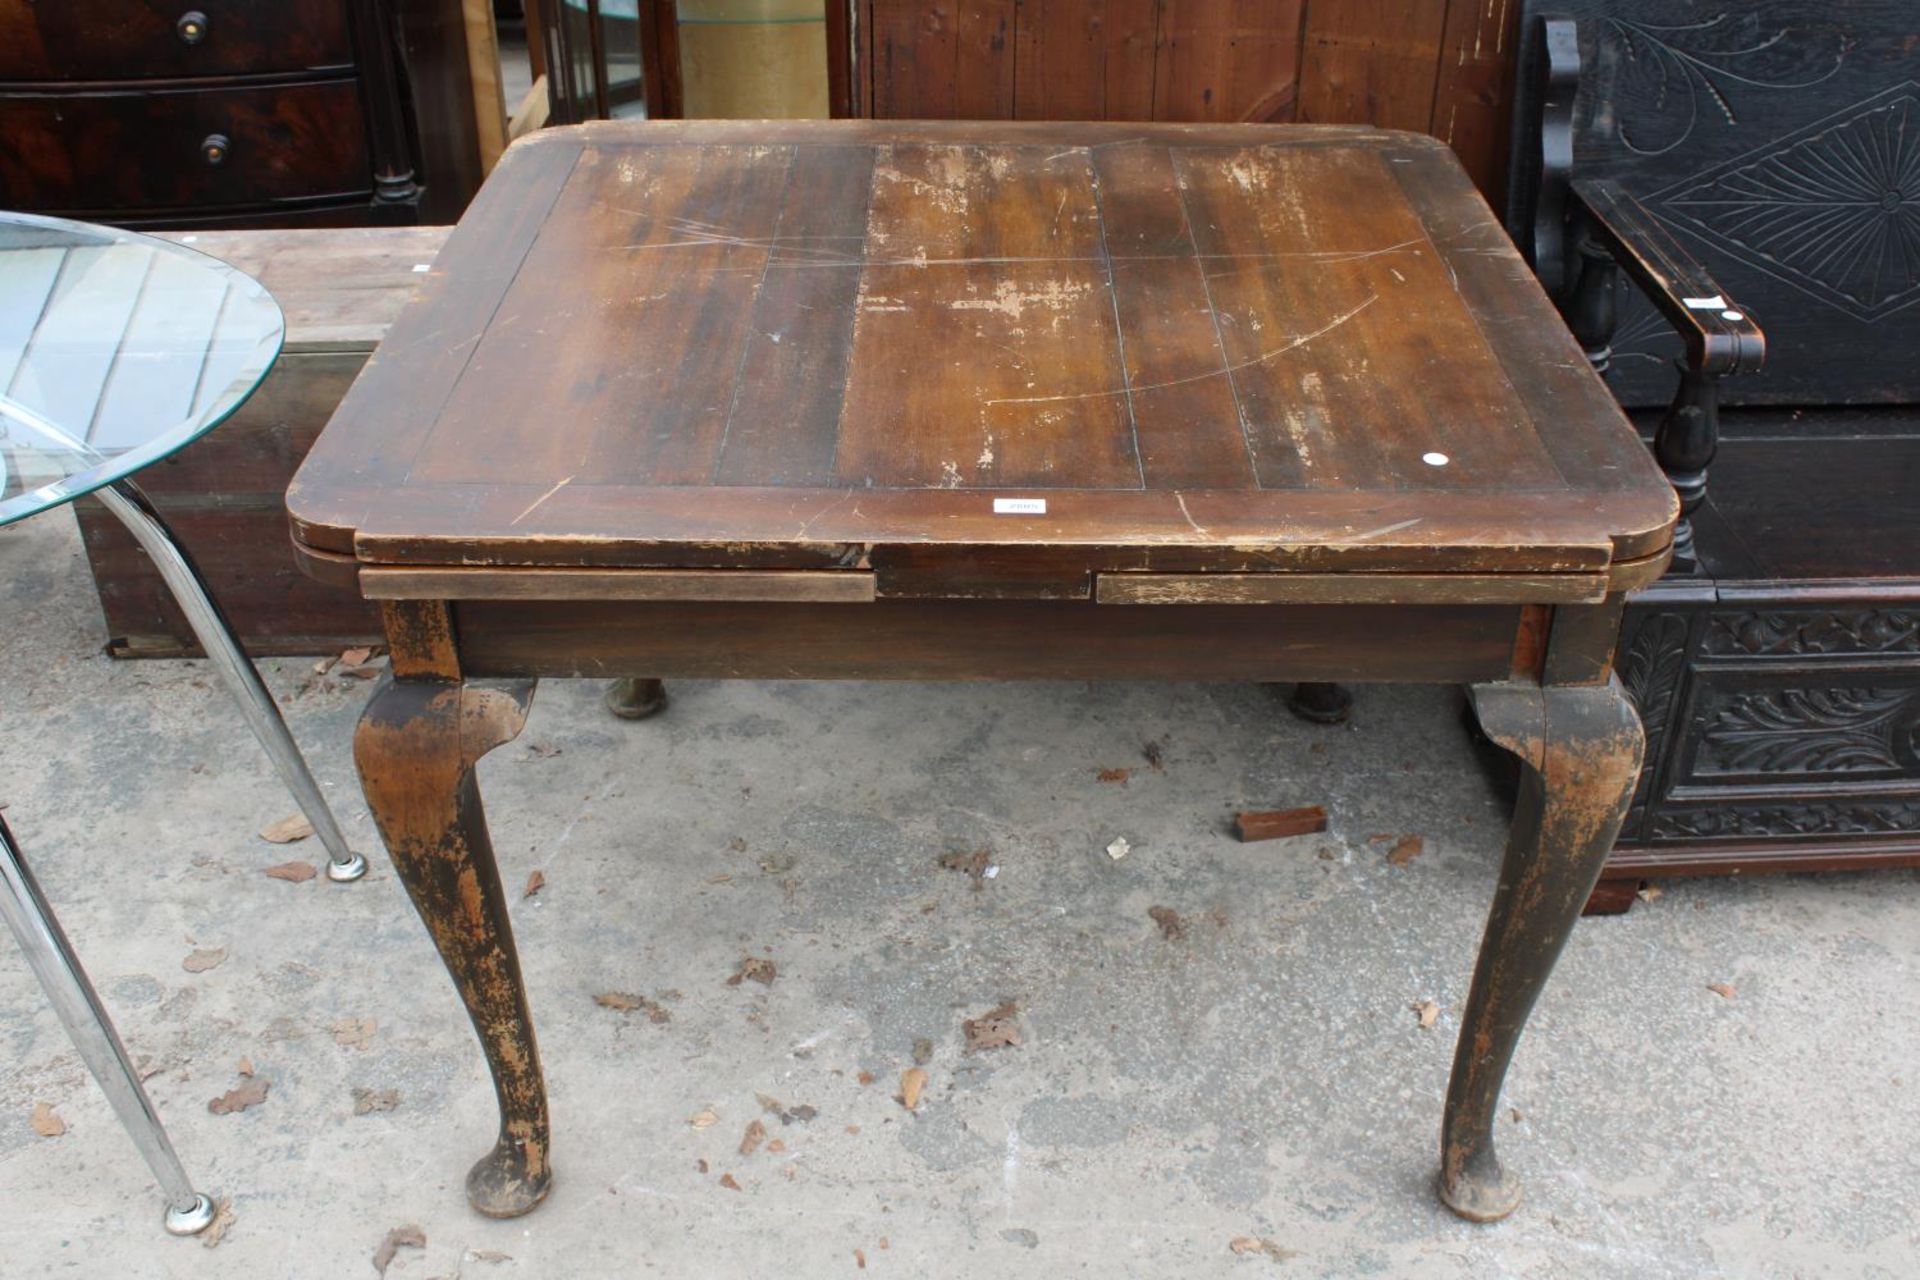 A MID 2OTH CENTURY DRAW-LEAF DINING TABLE ON CABRIOILE LEGS, 42" X 39" (LEAVES 18" EACH)